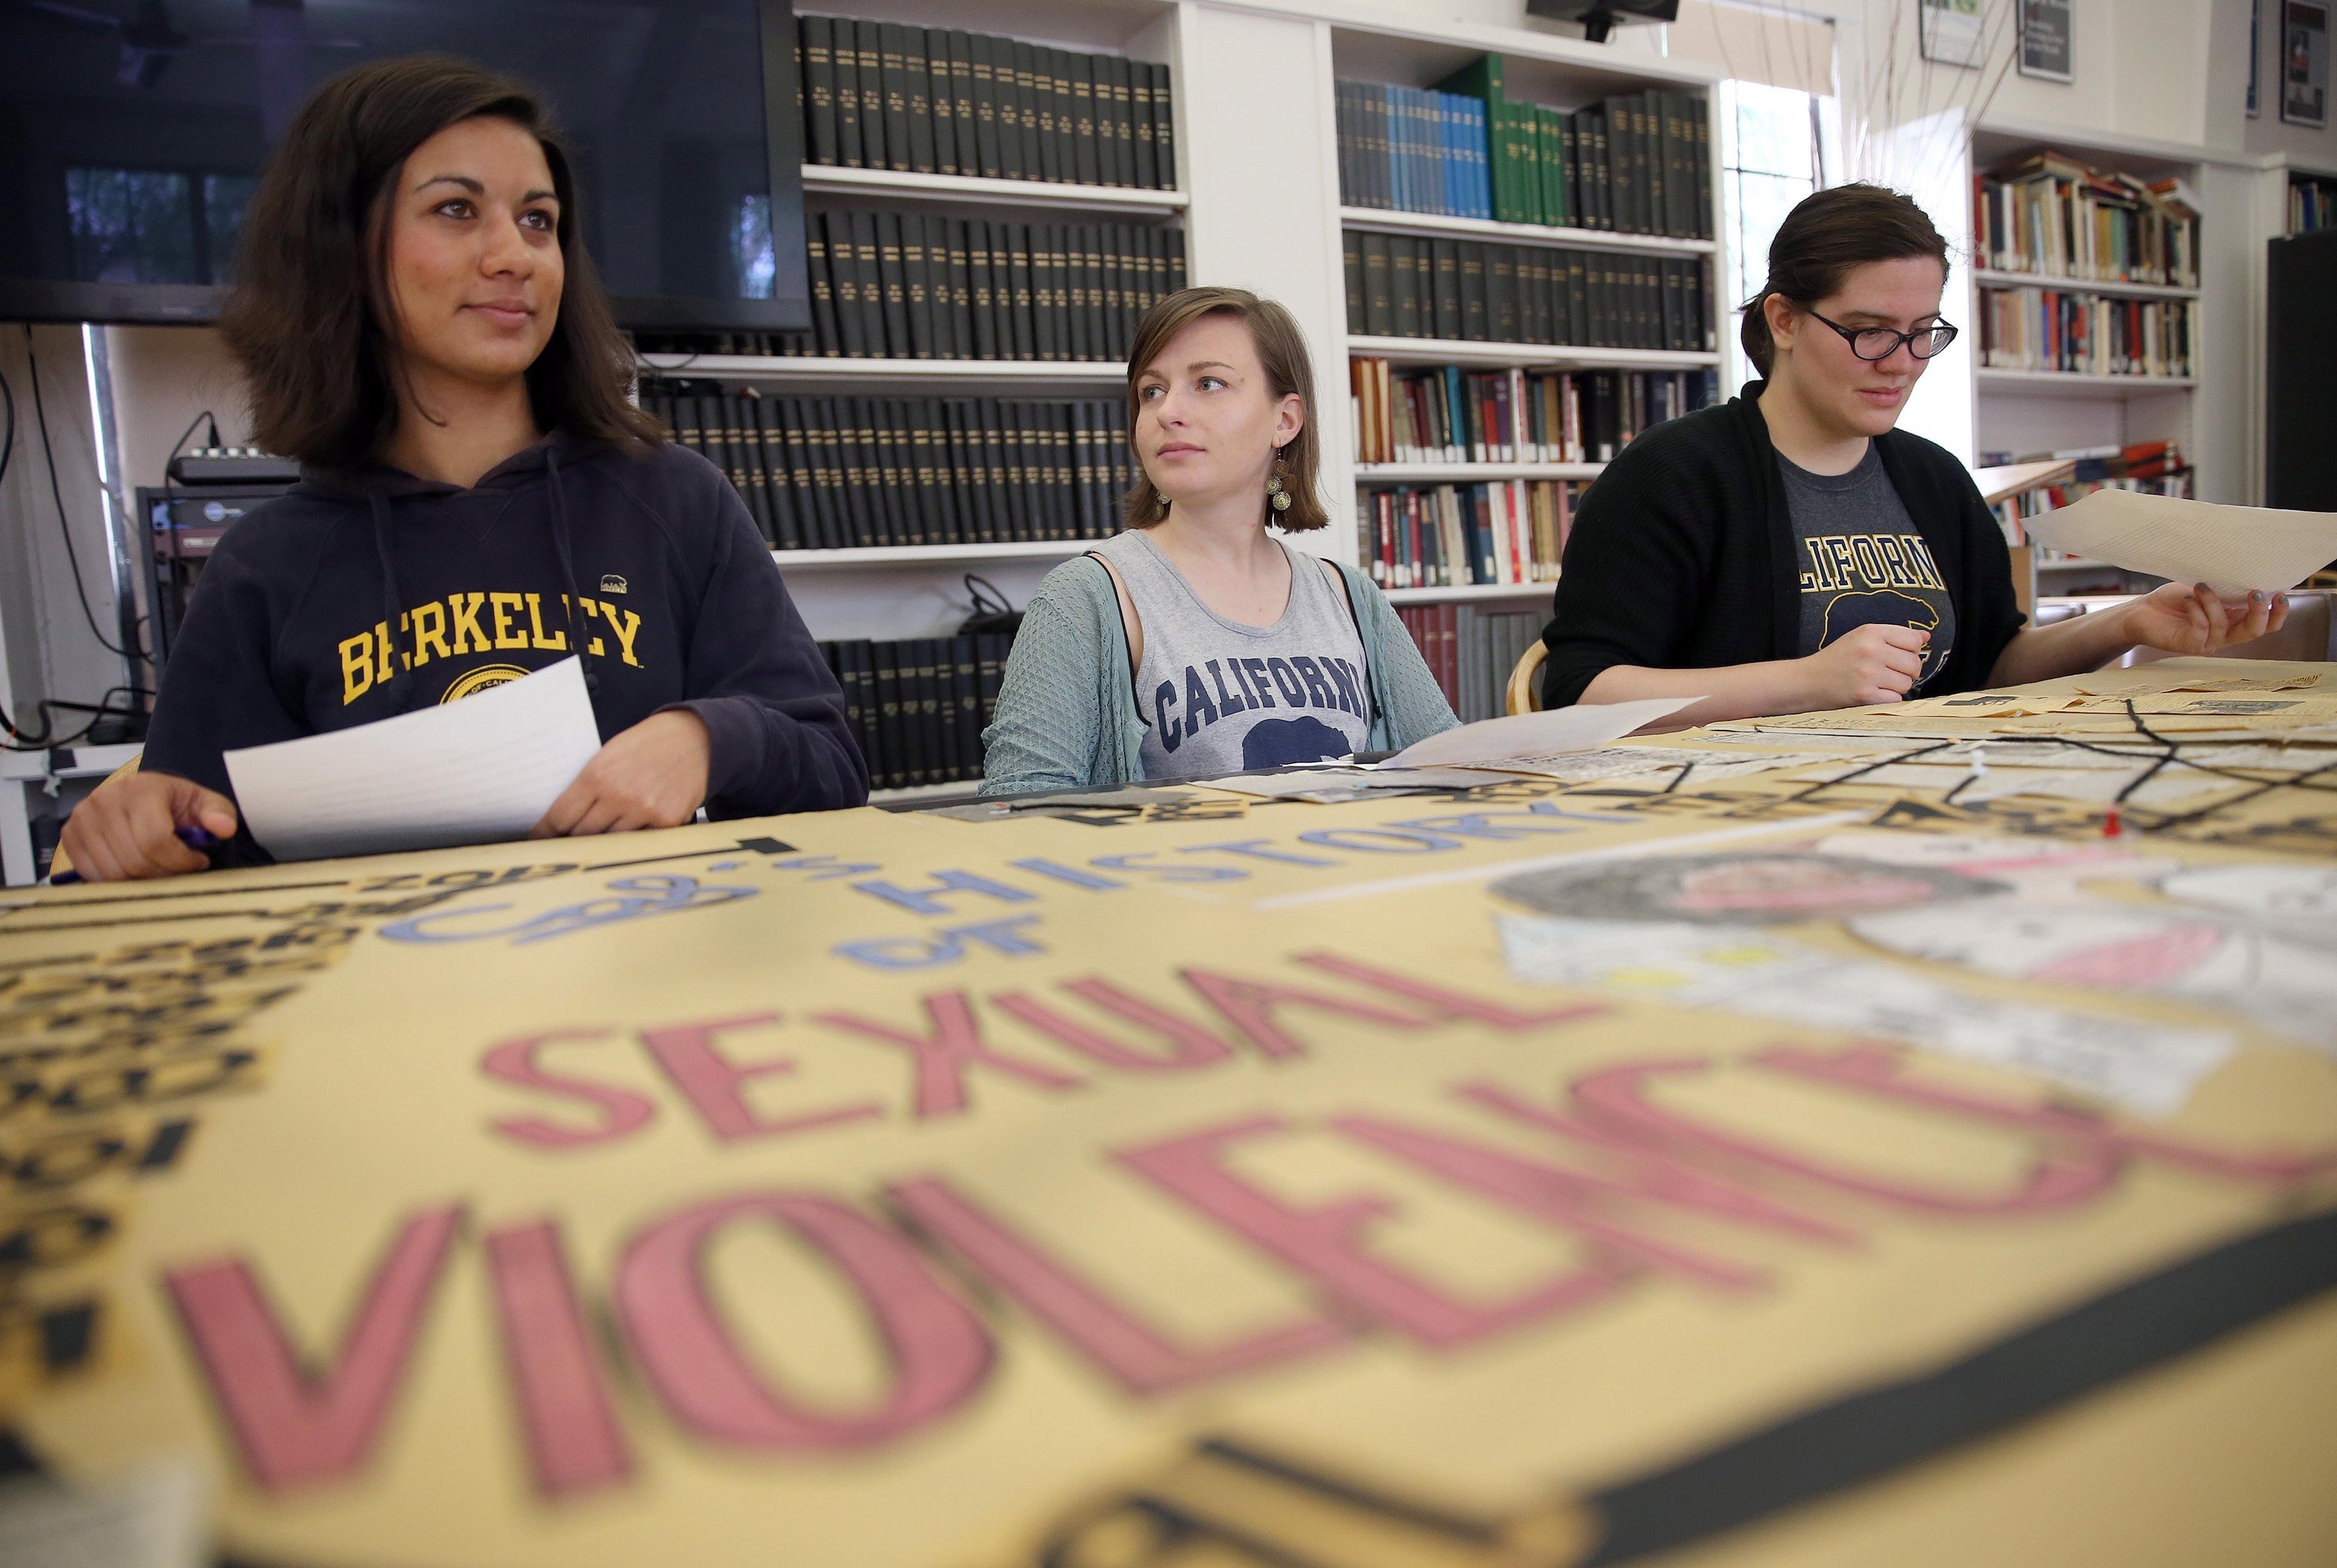 From left, Shannon Thomas, Nicoletta Commins and Aryle Butler hold a news conference at the University of California, Berkeley, Feb. 26. The three were among 31 current and former students who filed a federal complaint claiming the university violated Title IX by failing to protect them against sexual harrassment and assault. (MCT/Bay Area News Group/Jane Tyska)